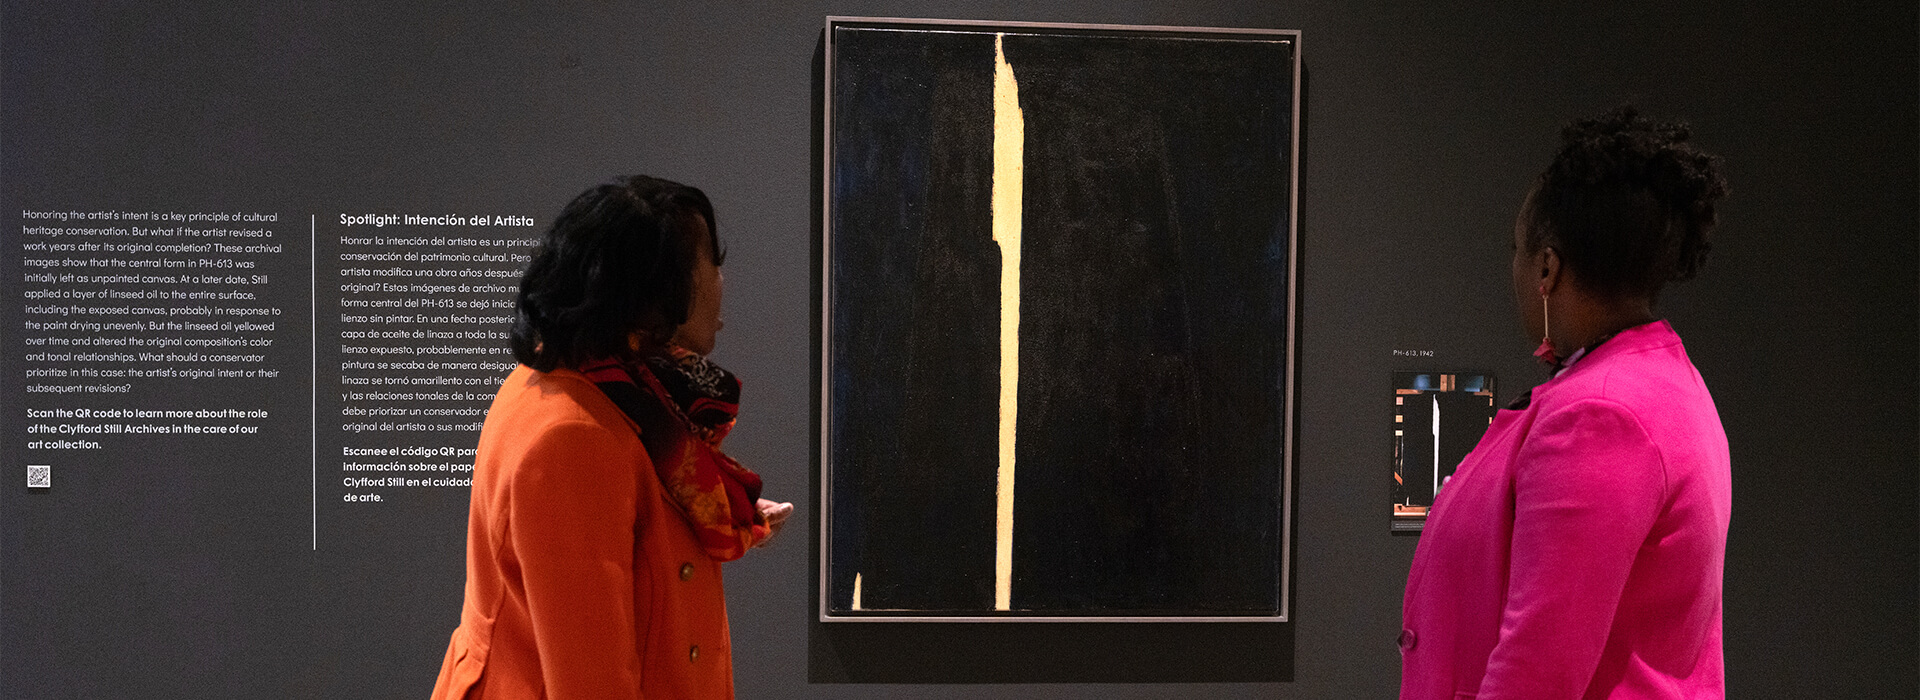 Two women wearing brightly colored jackets look at a dark painting with a vertical yellow line on a black wall